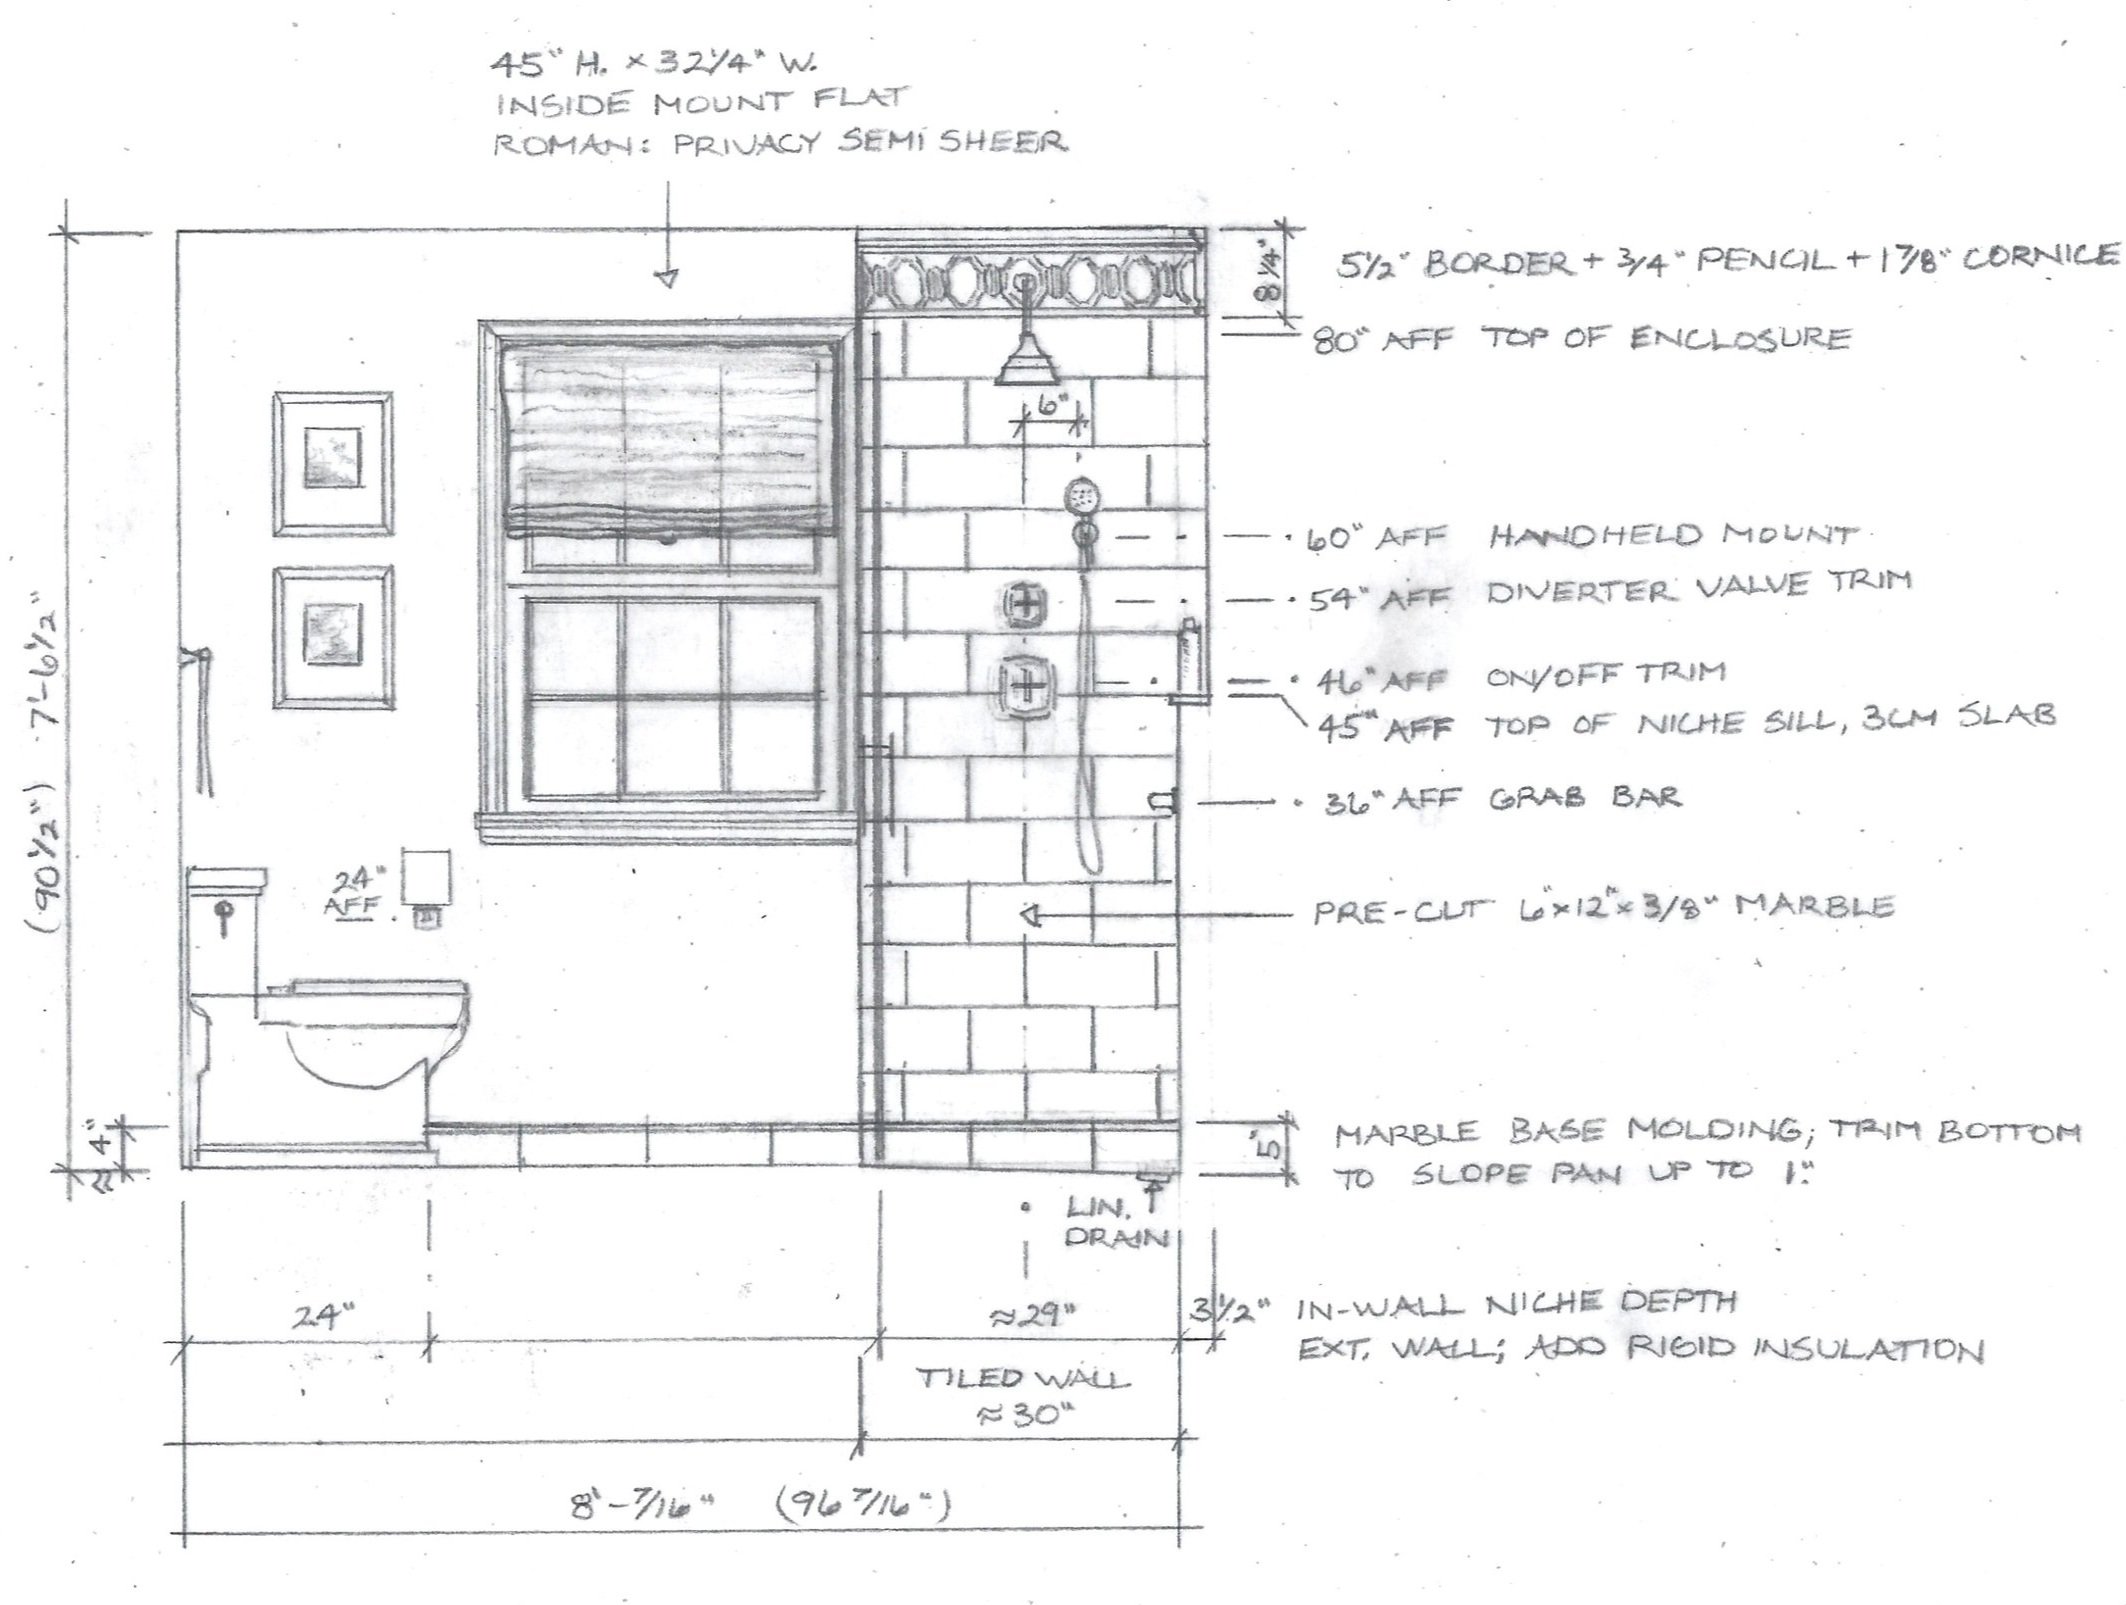 Window+wall+and+shower+fixture+wall+long+elevation+8_25.jpg